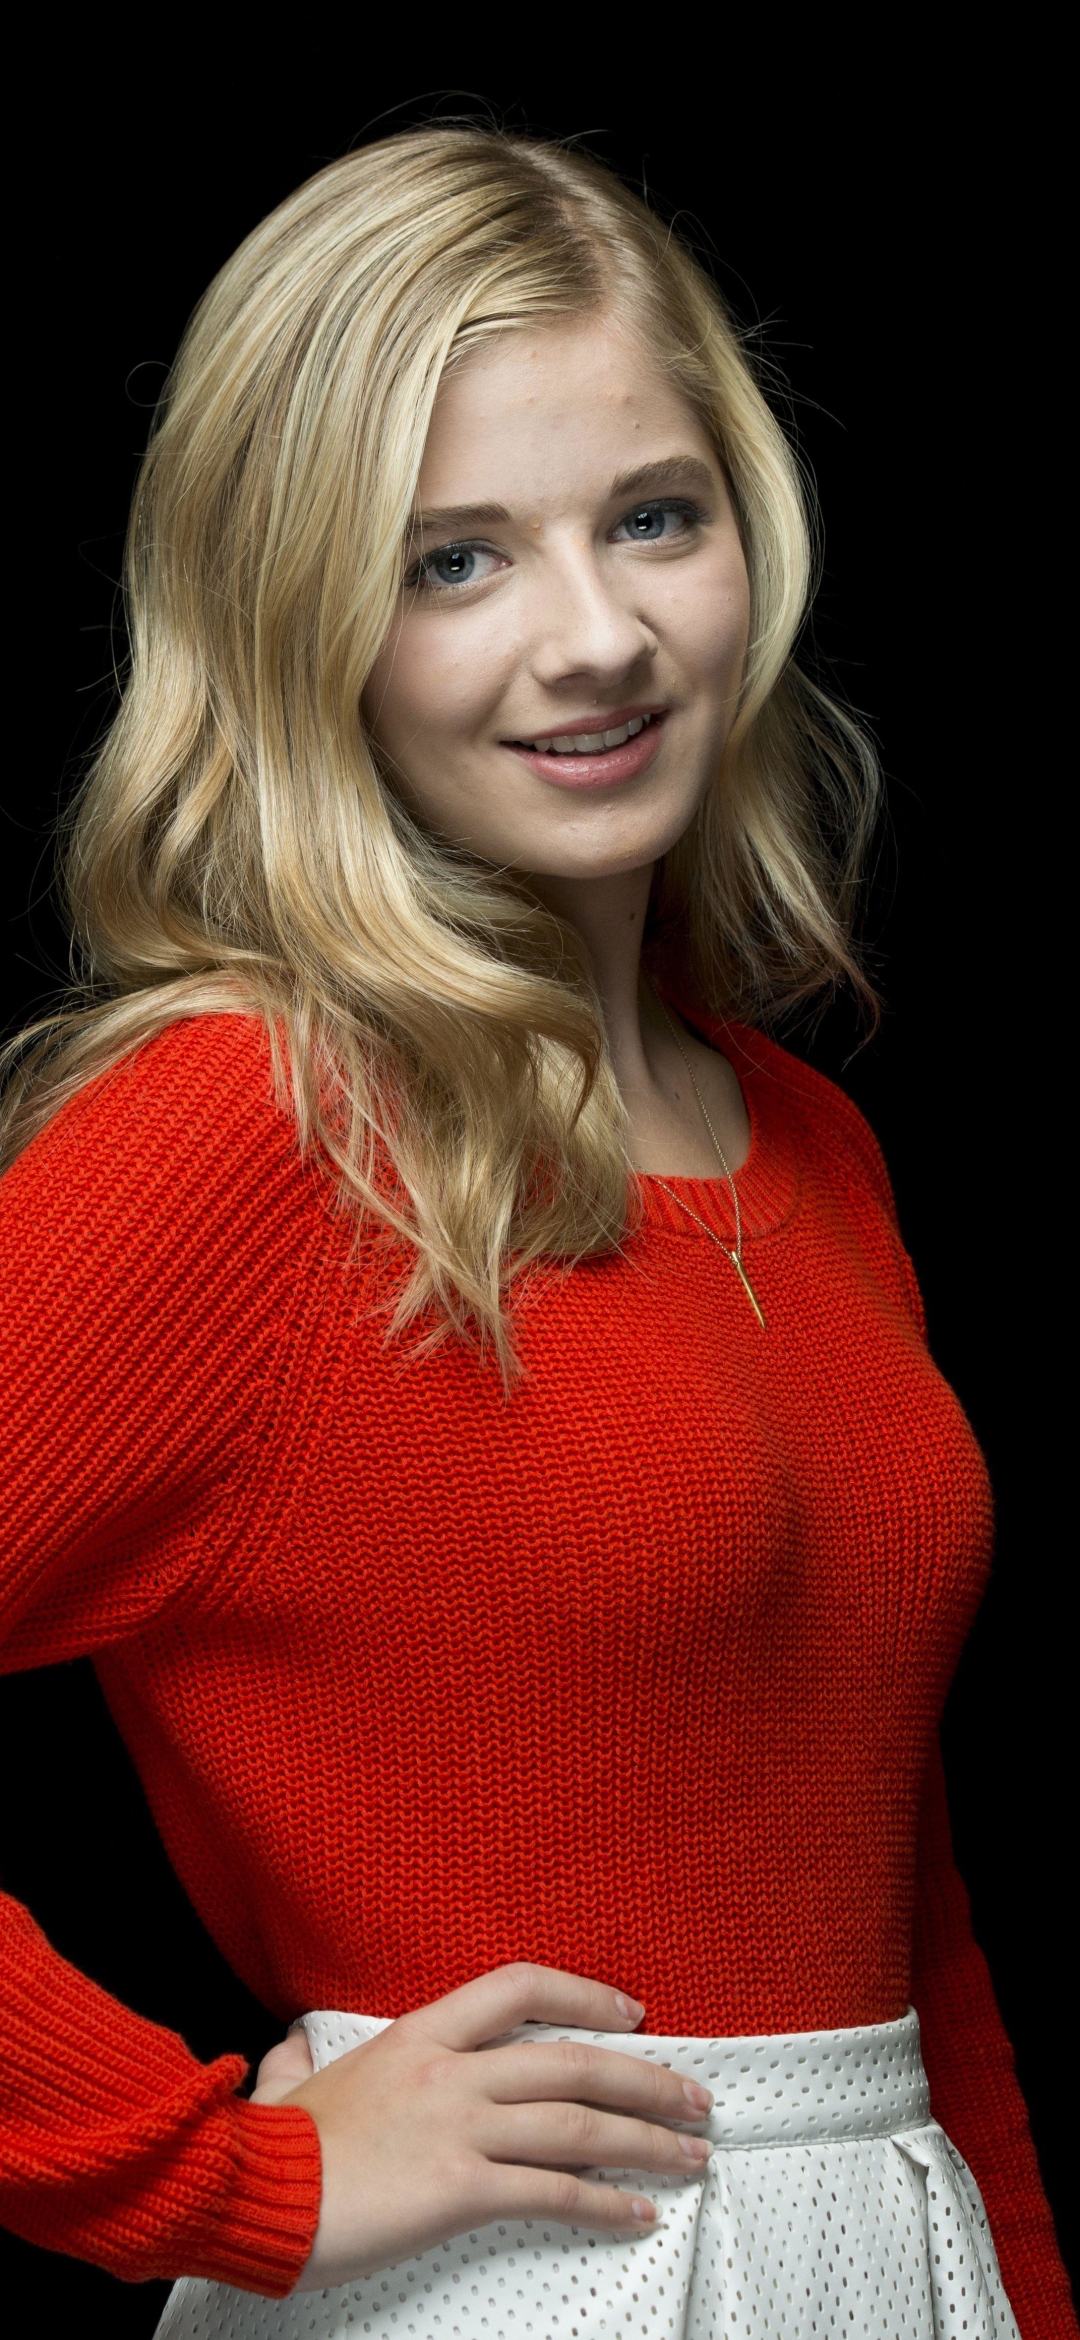 music, jackie evancho lock screen backgrounds